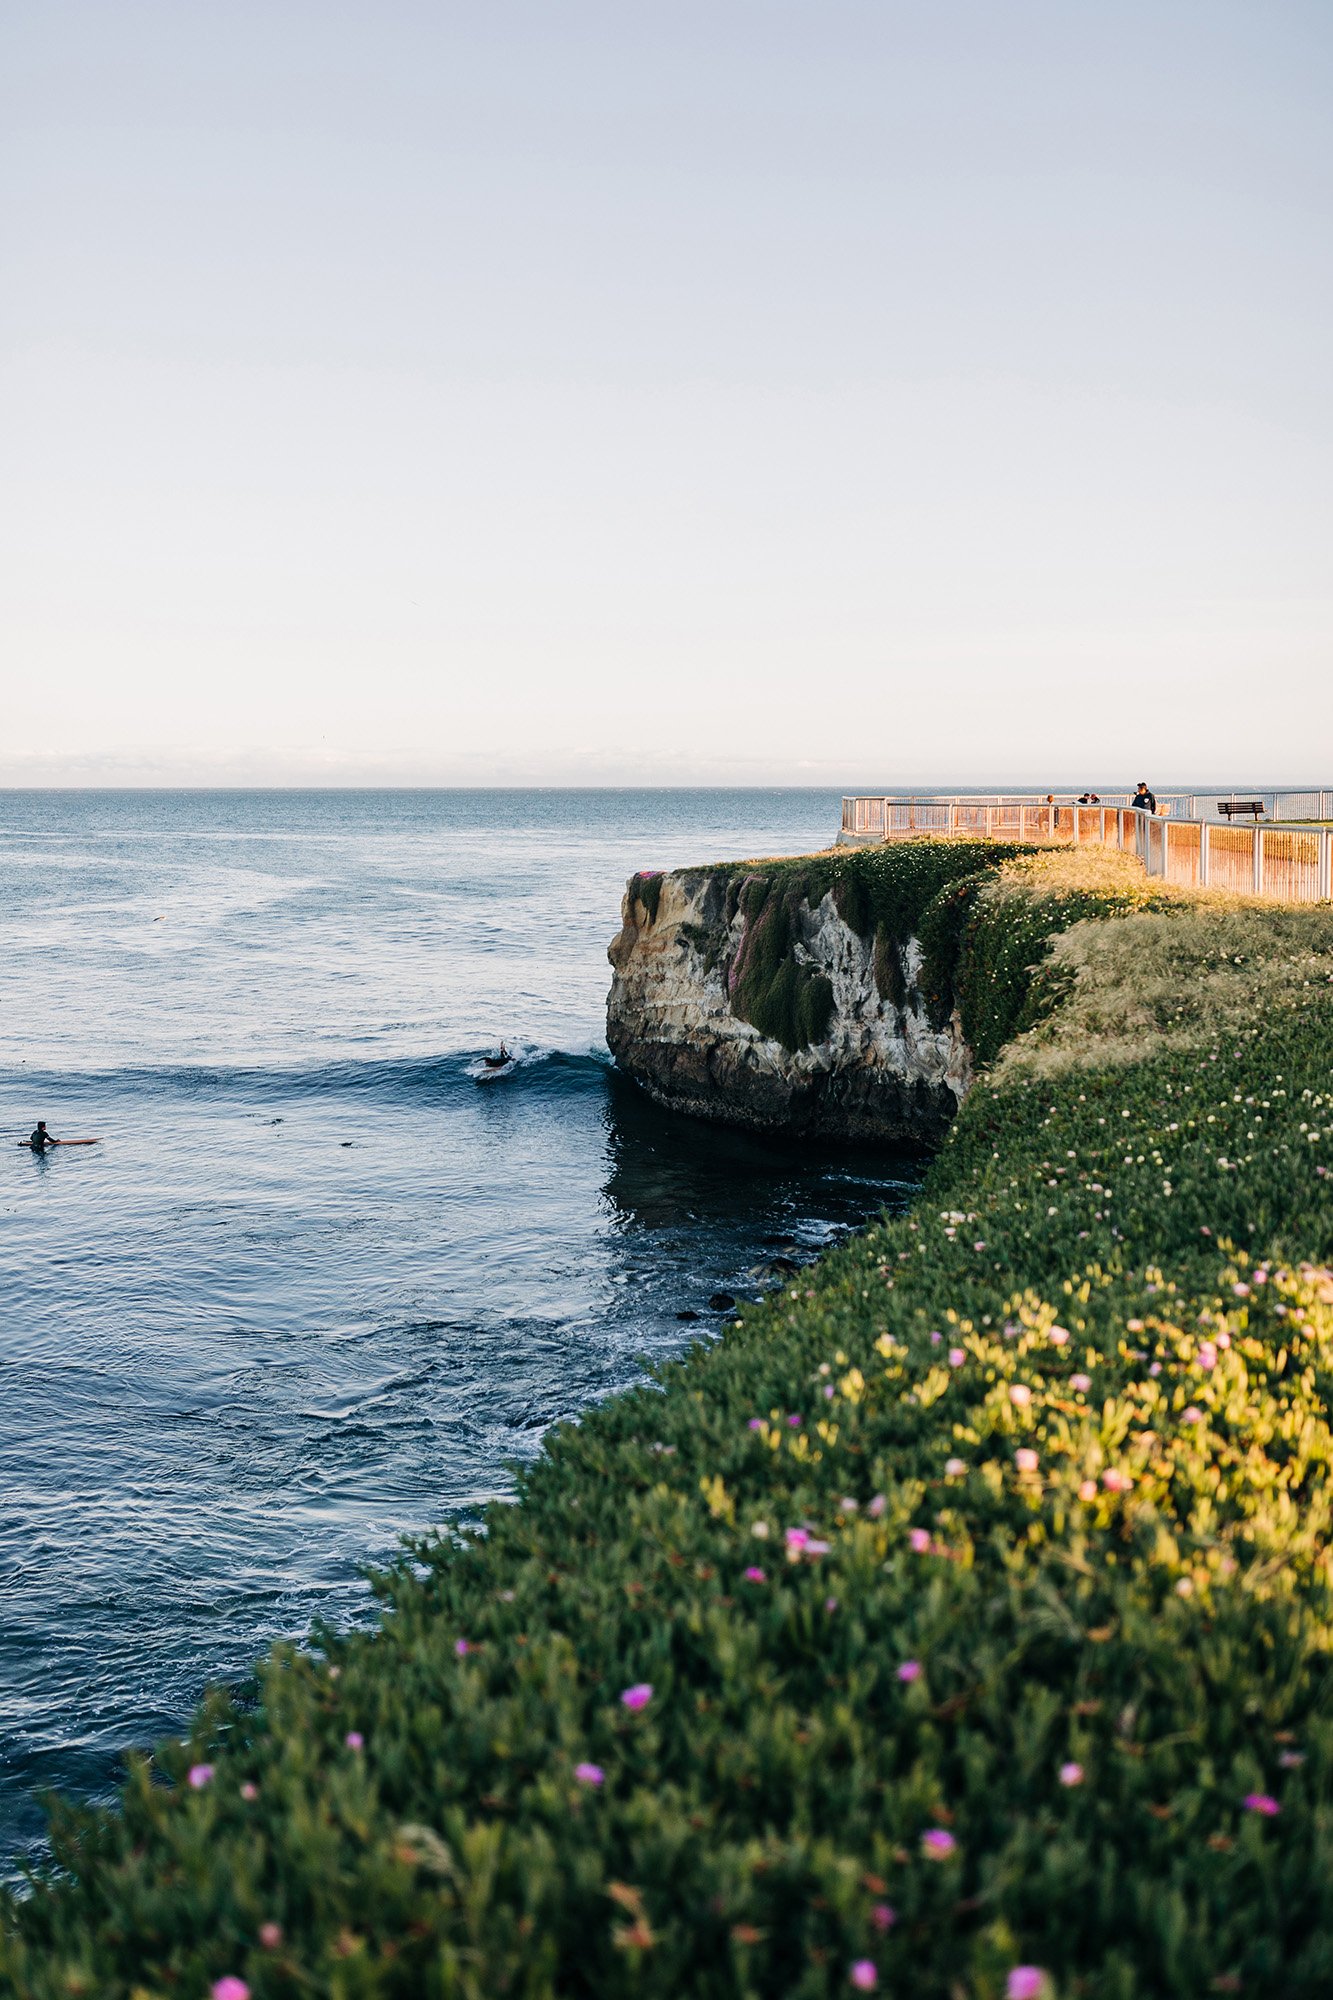 A view of the water from a cliff in Santa Cruz, California.